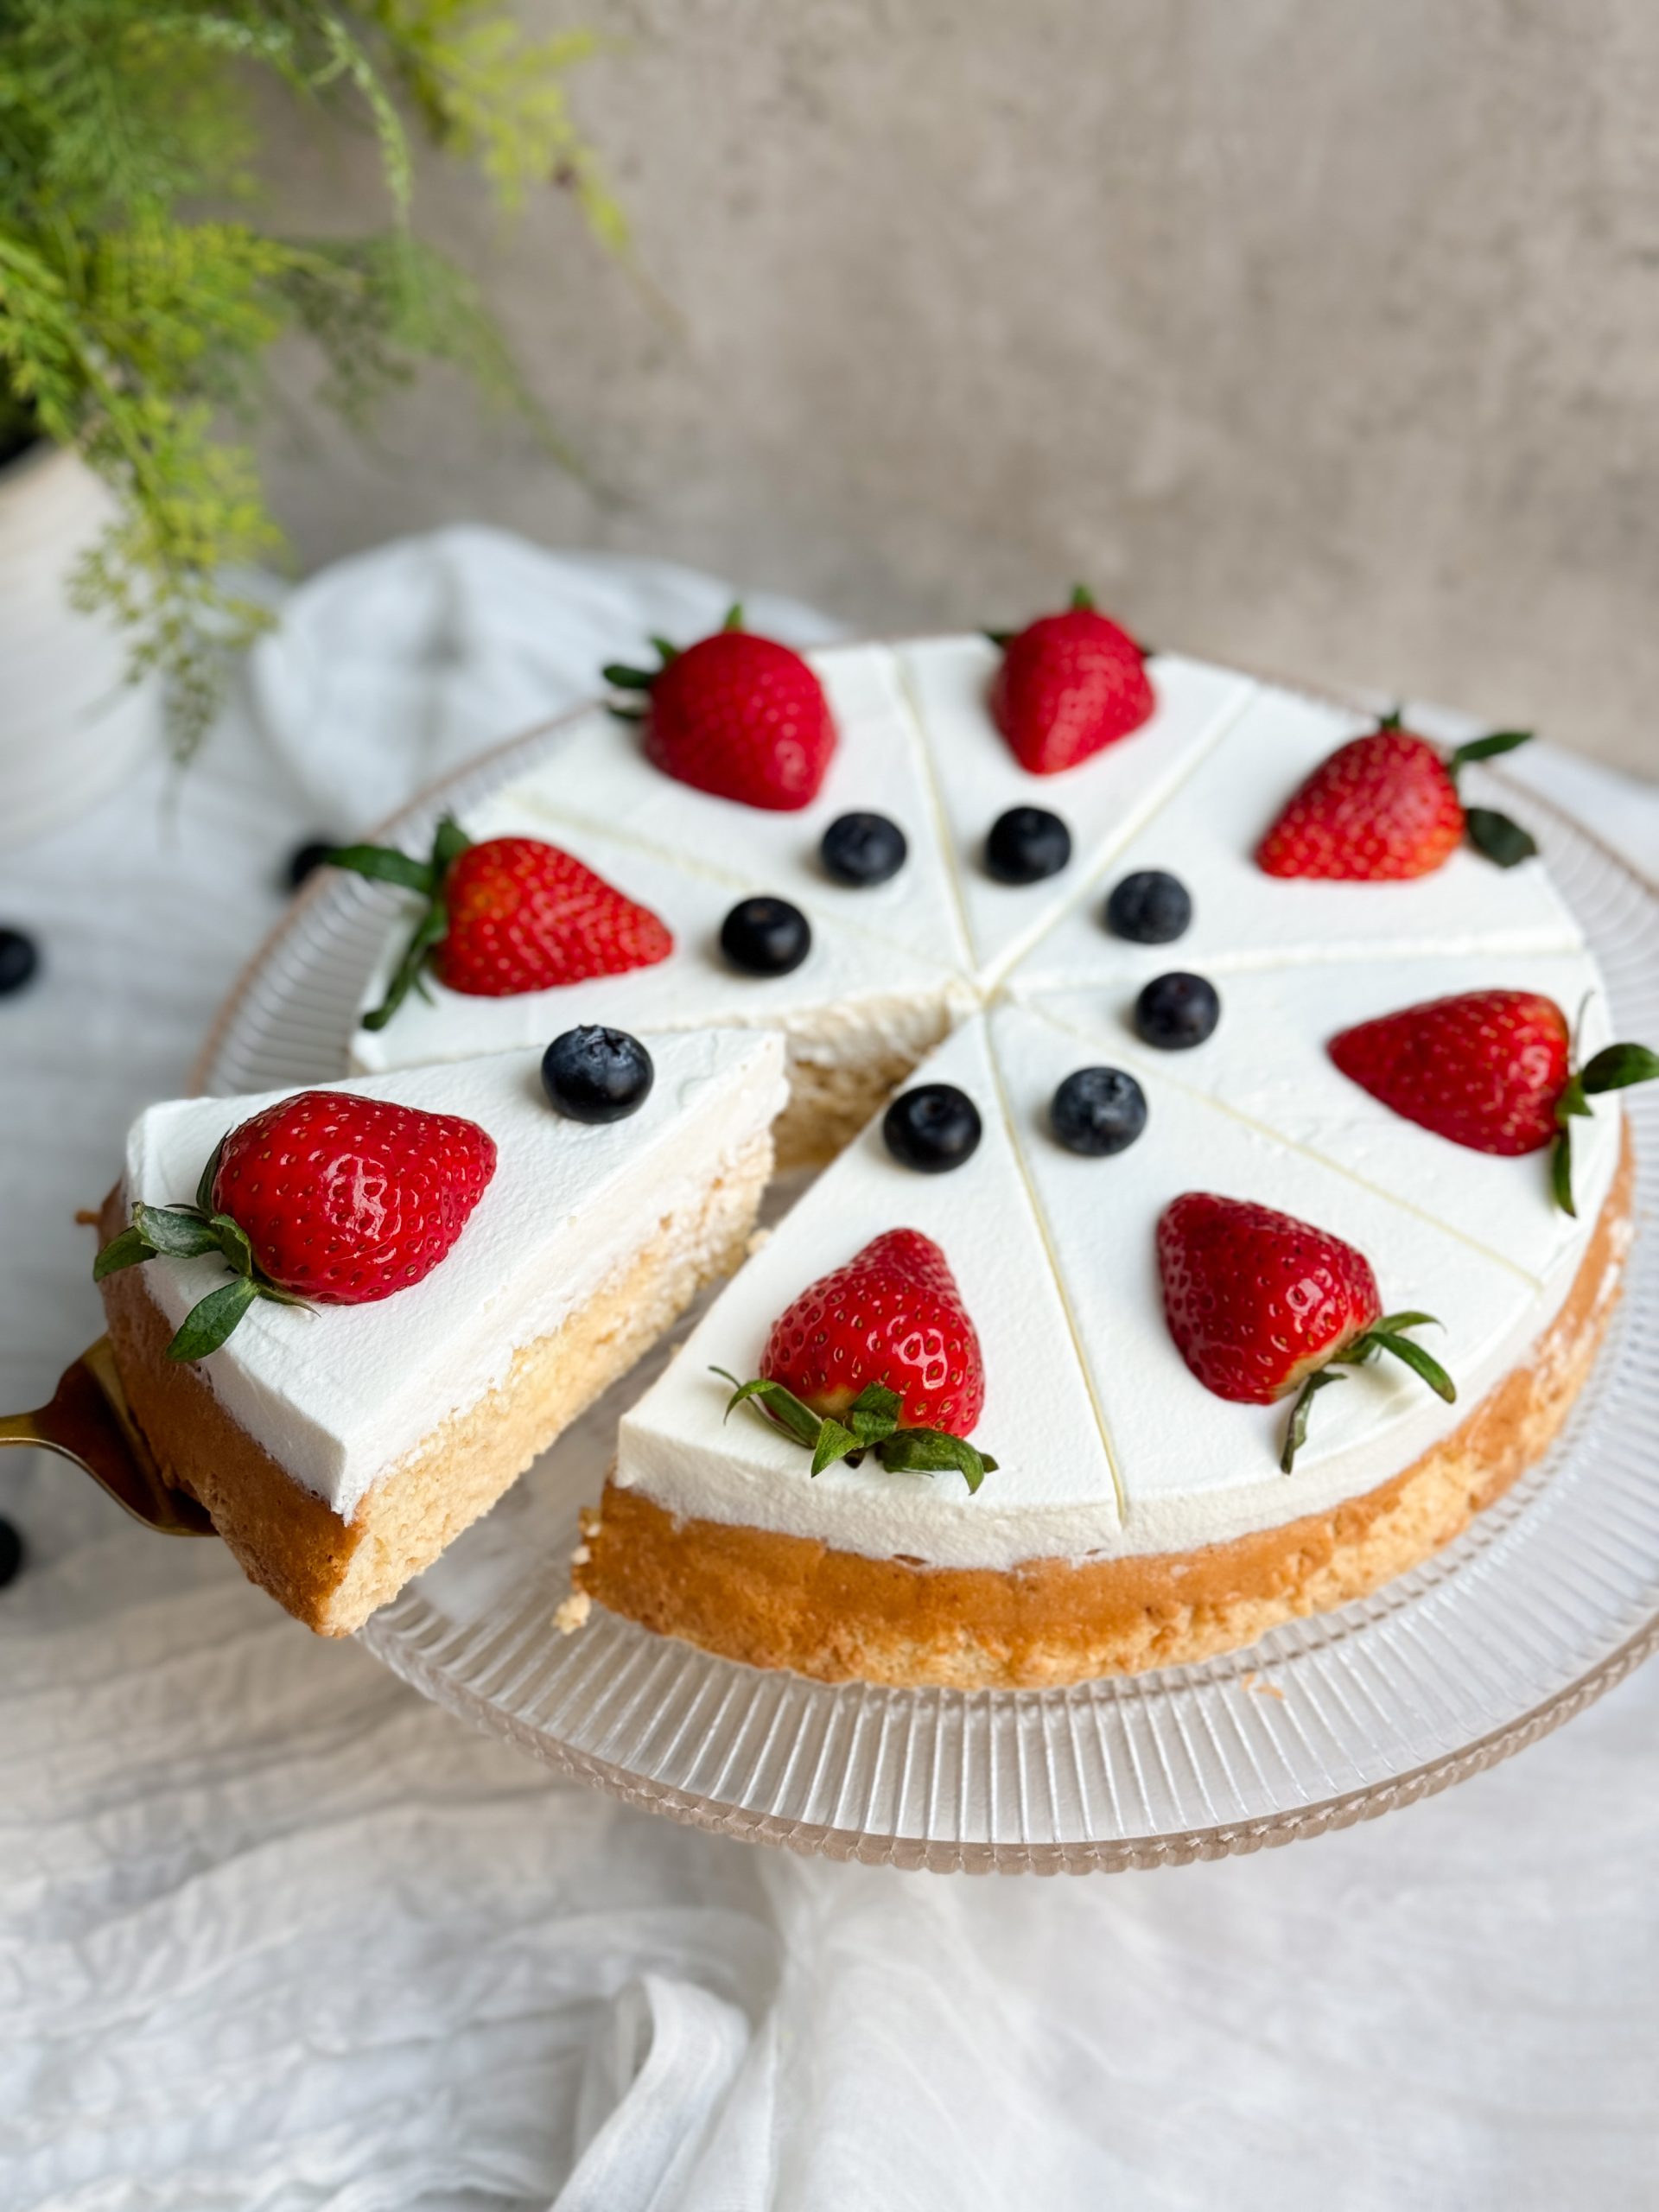 tres leches cake on a glass serving stand. cake is decorated with a thick layer of whipped cream and fresh berries. a spatula is pulling out a slice to show the moist and soft interior of the cake